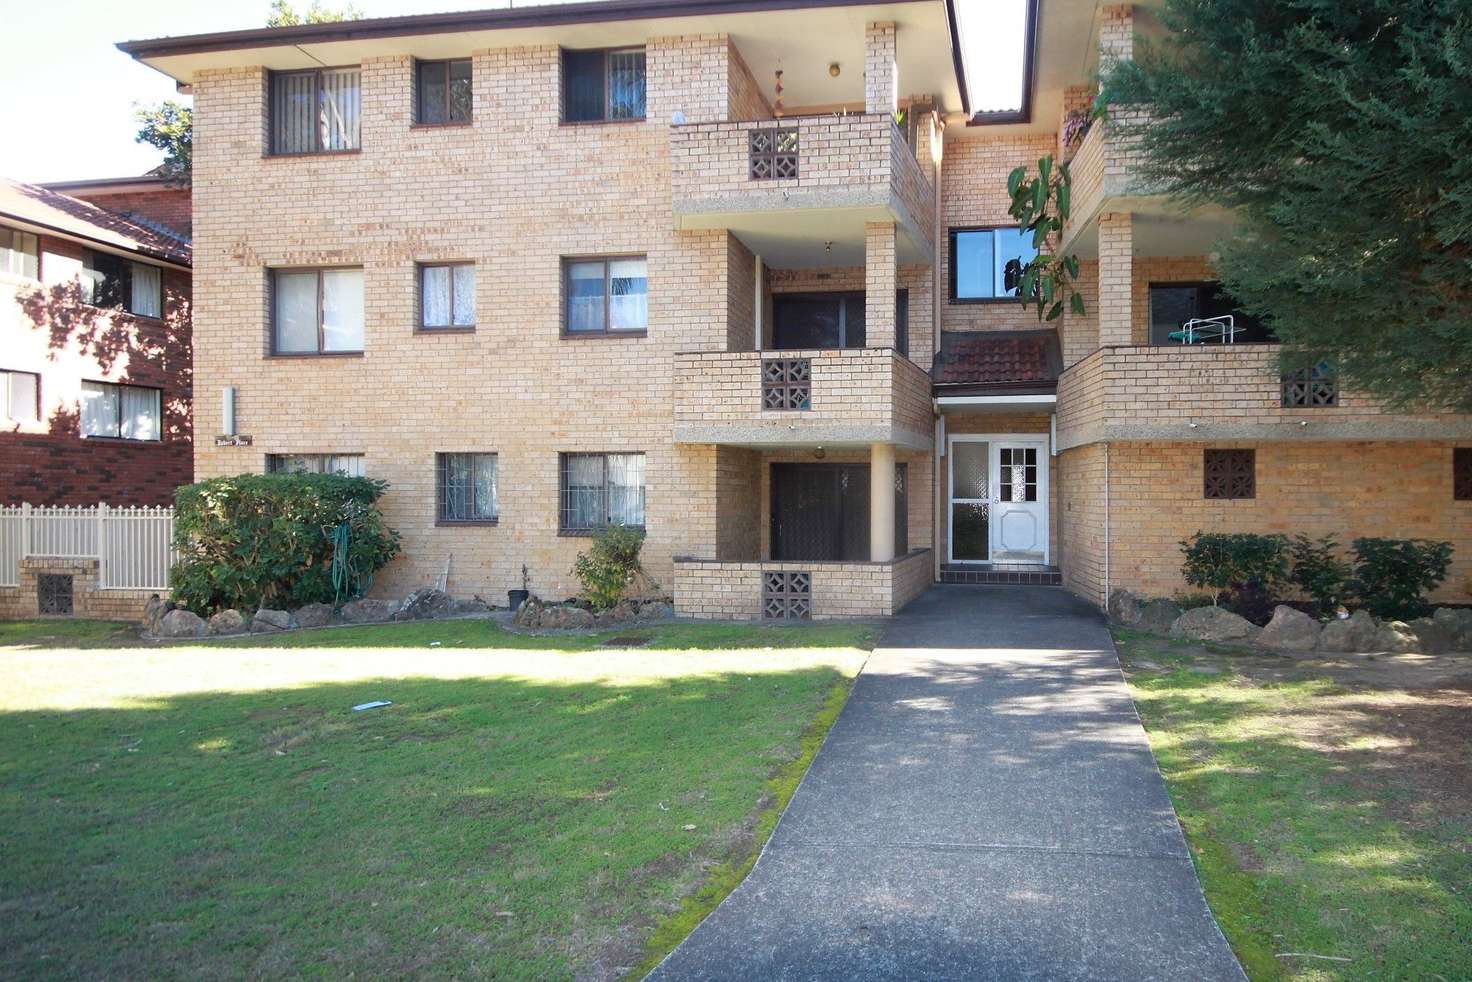 Main view of Homely house listing, 1/19-21 O'connell Street, Parramatta NSW 2150